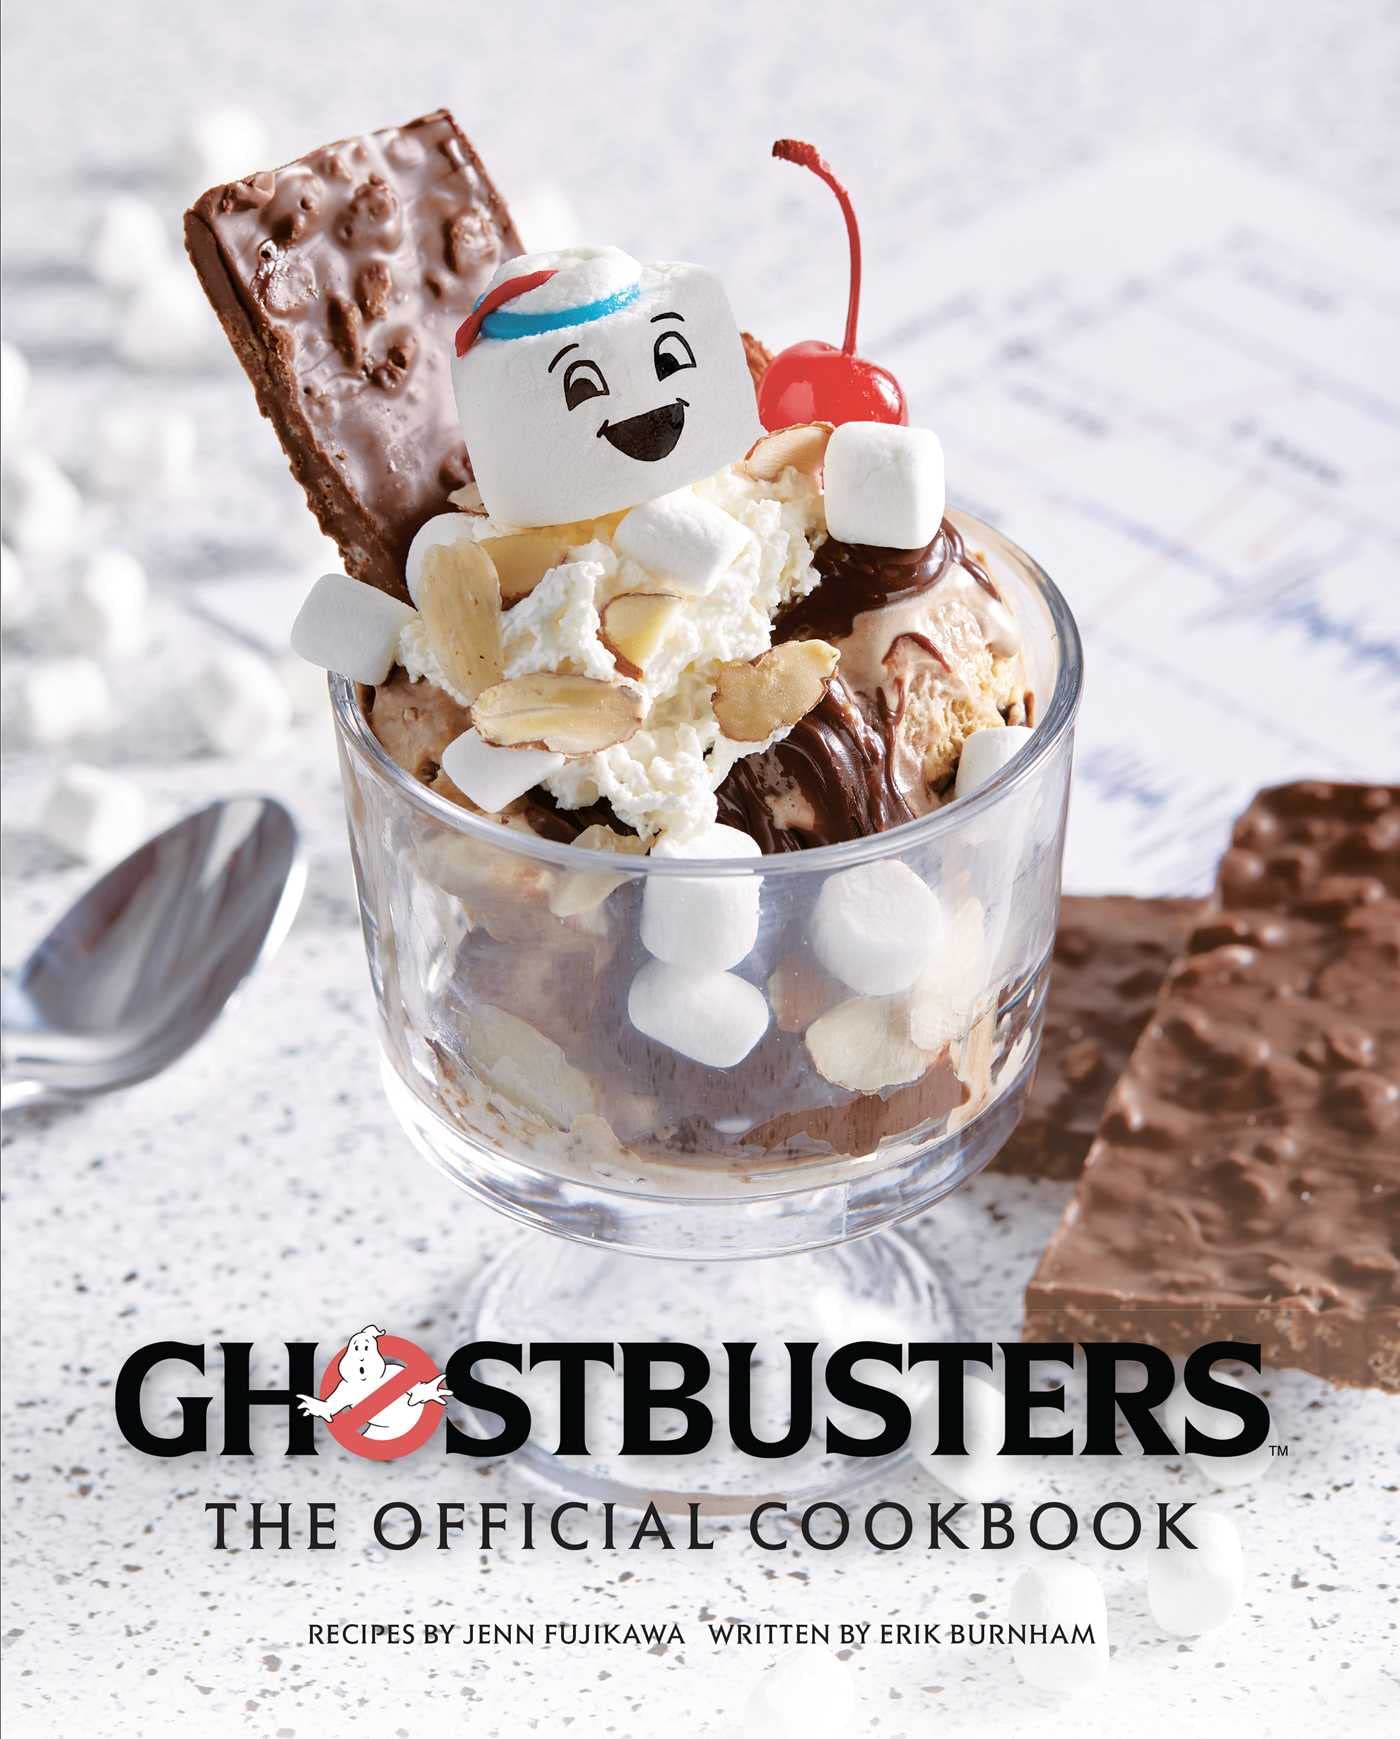 The Ghostbusters cookbook. (Image: Sony)